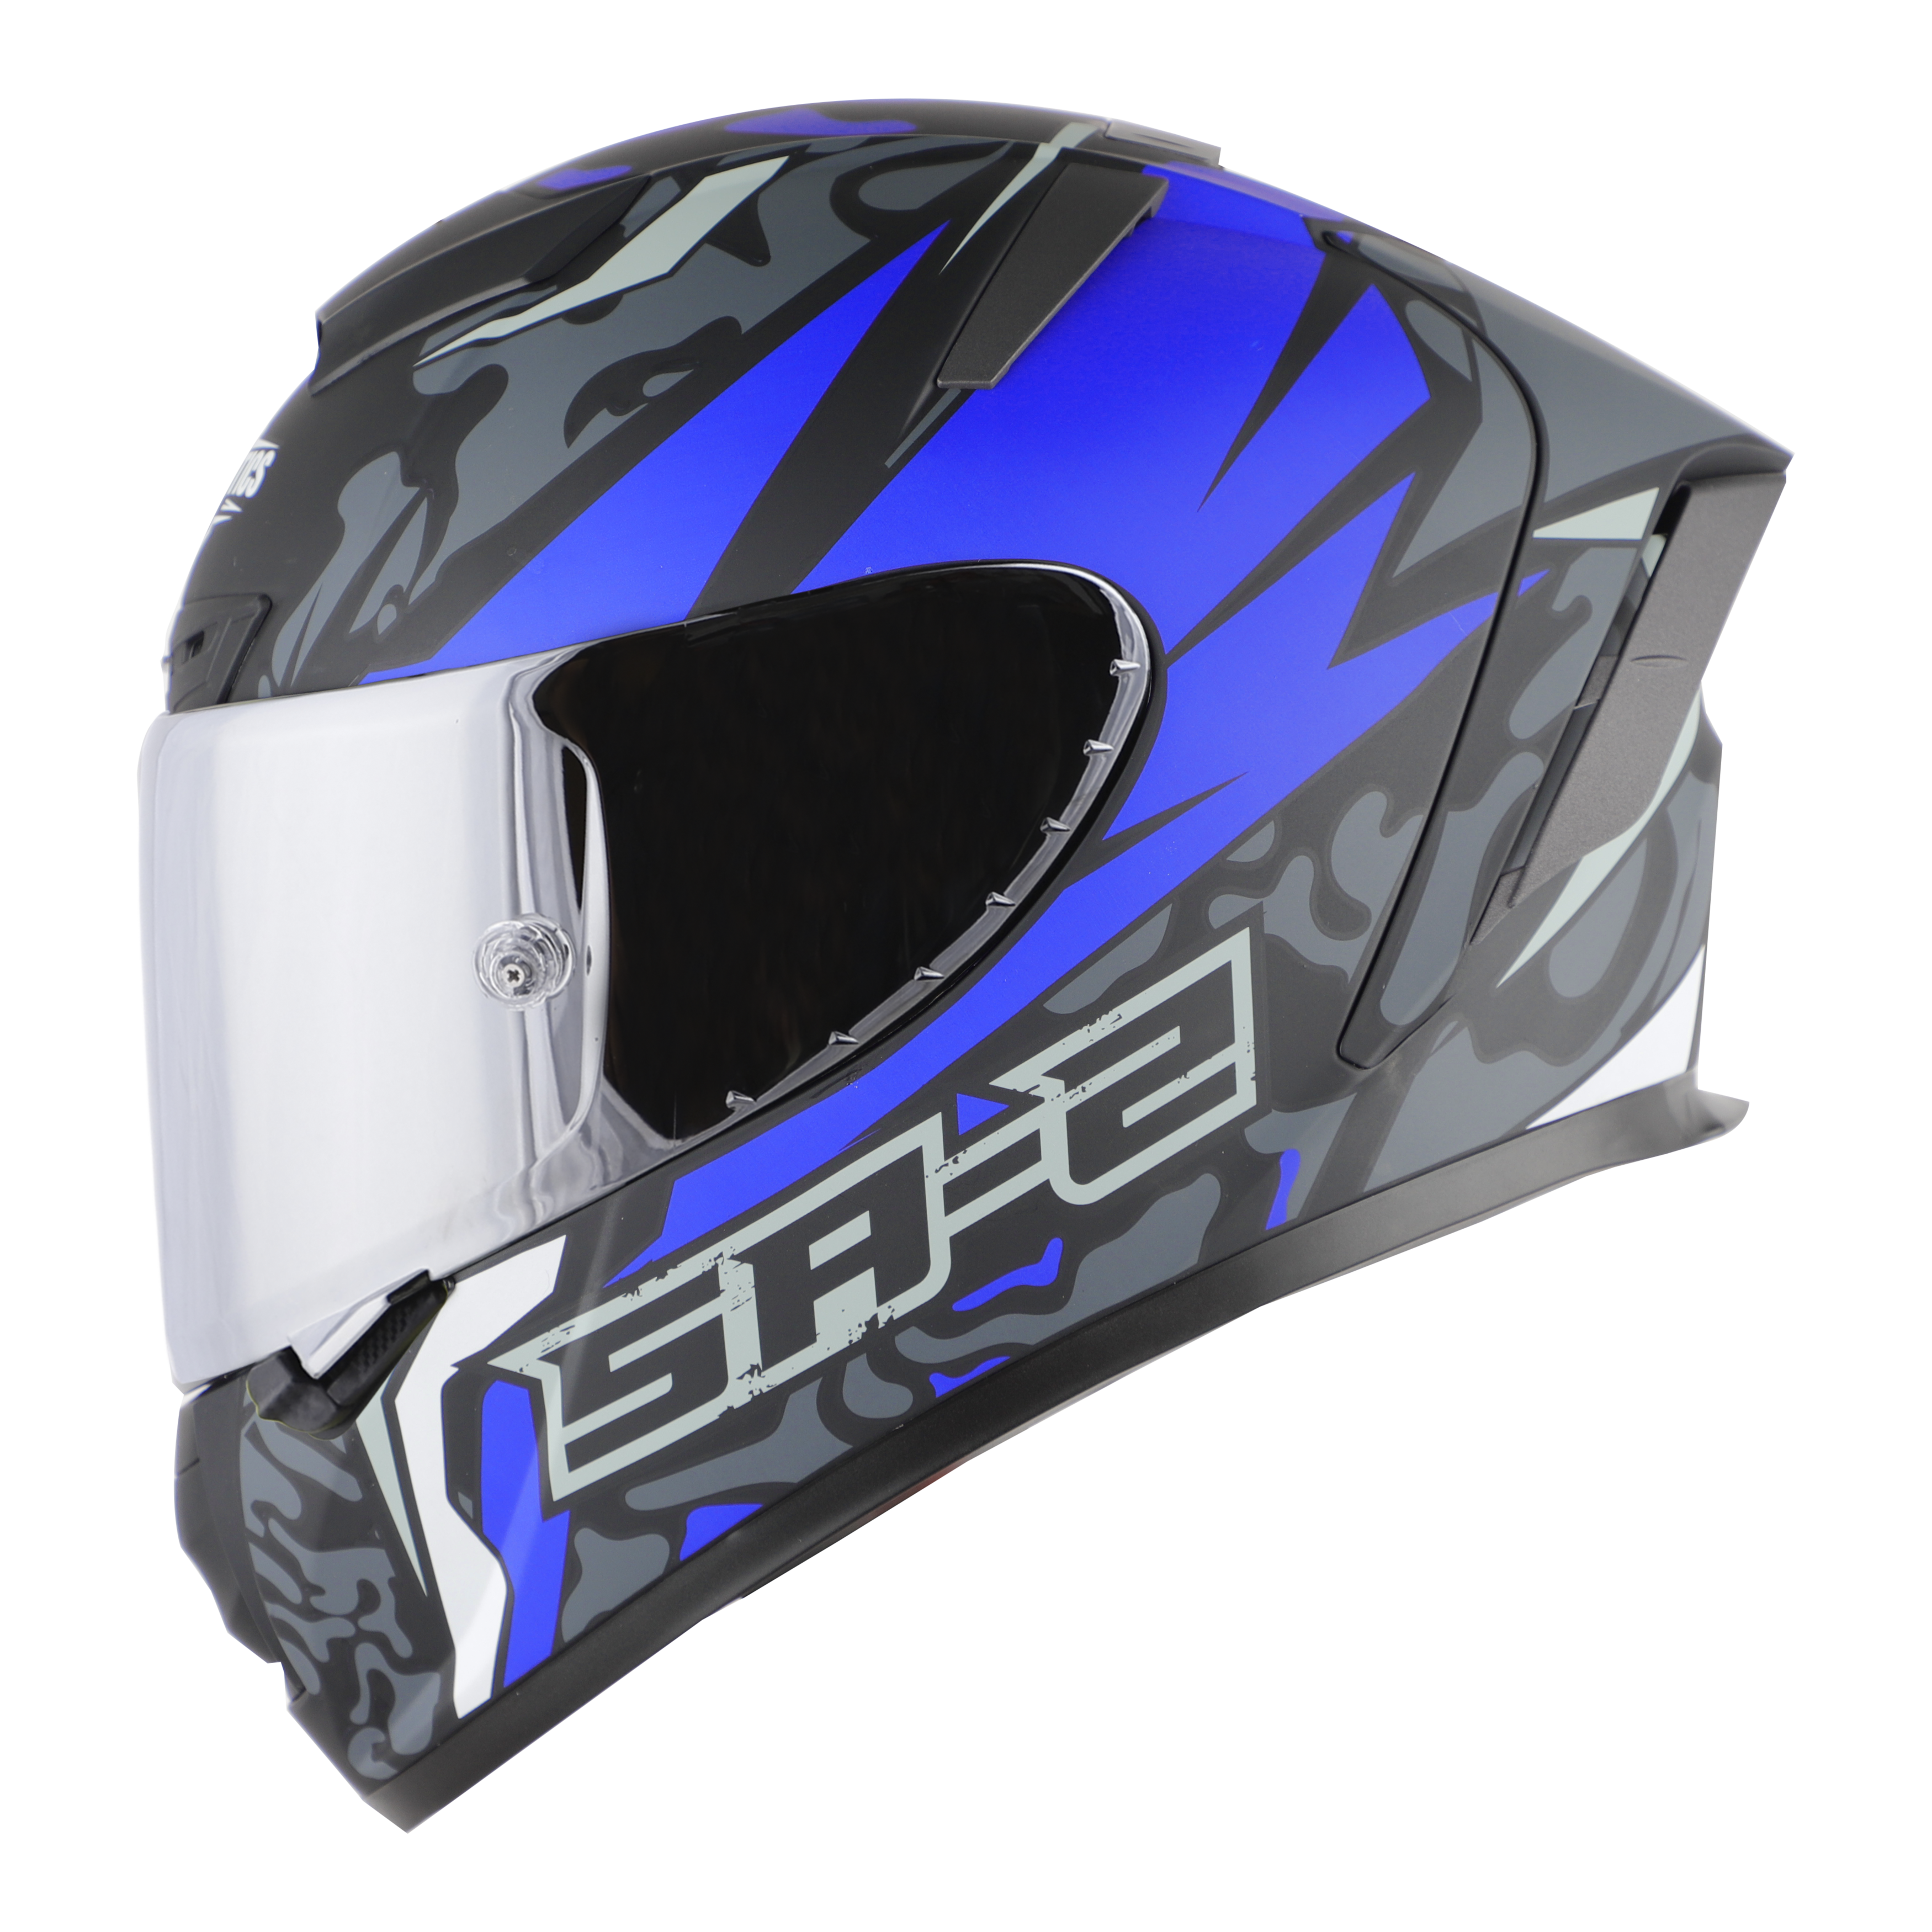 SA-2 TERMINATOR 3.0 MAT BLACK WITH BLUE FITTED WITH CLEAR VISOR EXTRA SILVER CHROME VISOR FREE (WITH ANTI-FOR SHIELD HOLDER)